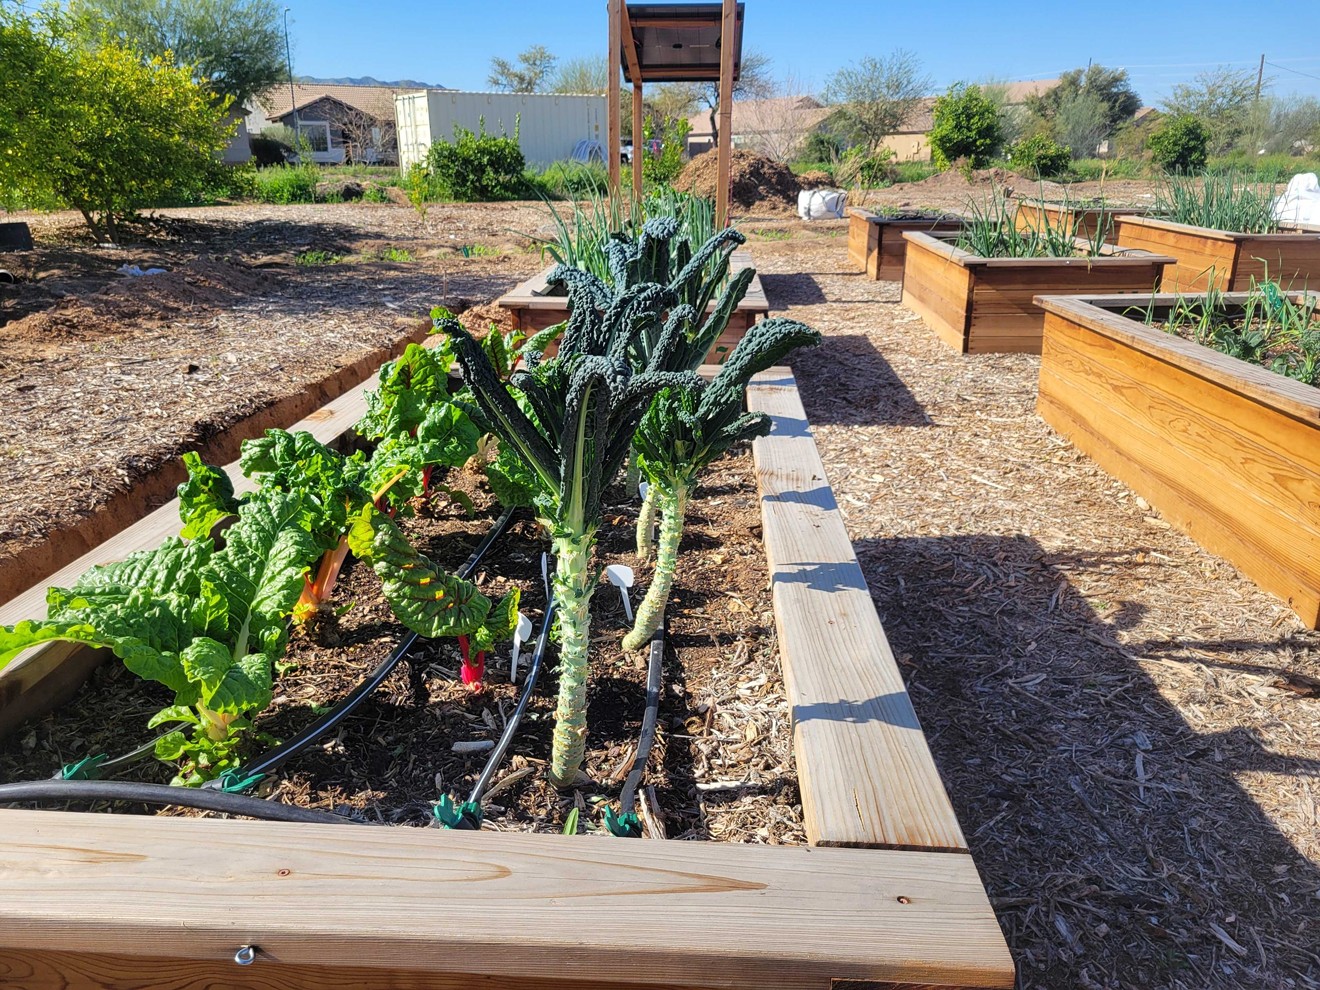 In close proximity to the canals of south Phoenix, Spaces of Opportunity uses flood irrigation to water its plants and gardens.